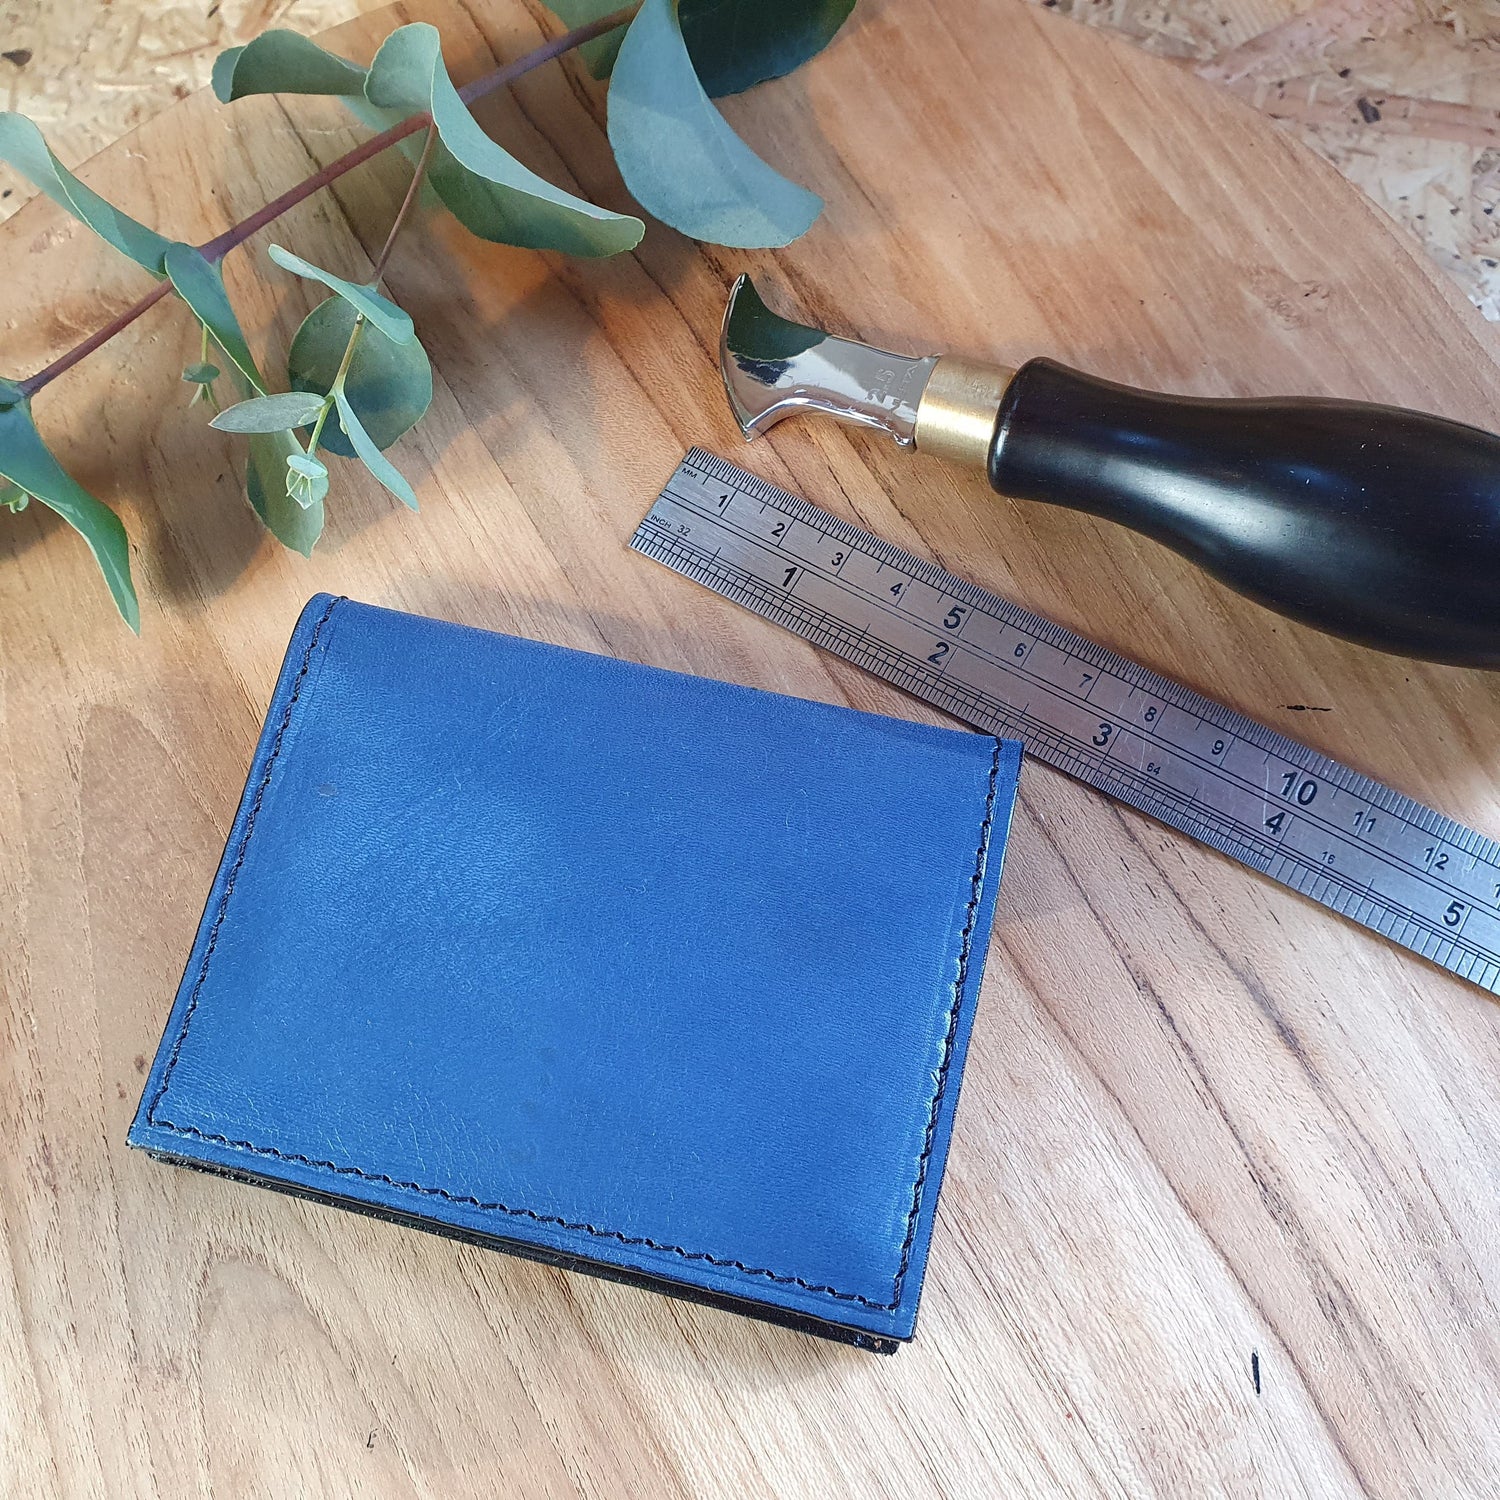 Hands of Tym Course 'Wallet in a Day' Practical Hand Stitching Leather Course - The Card Wallet